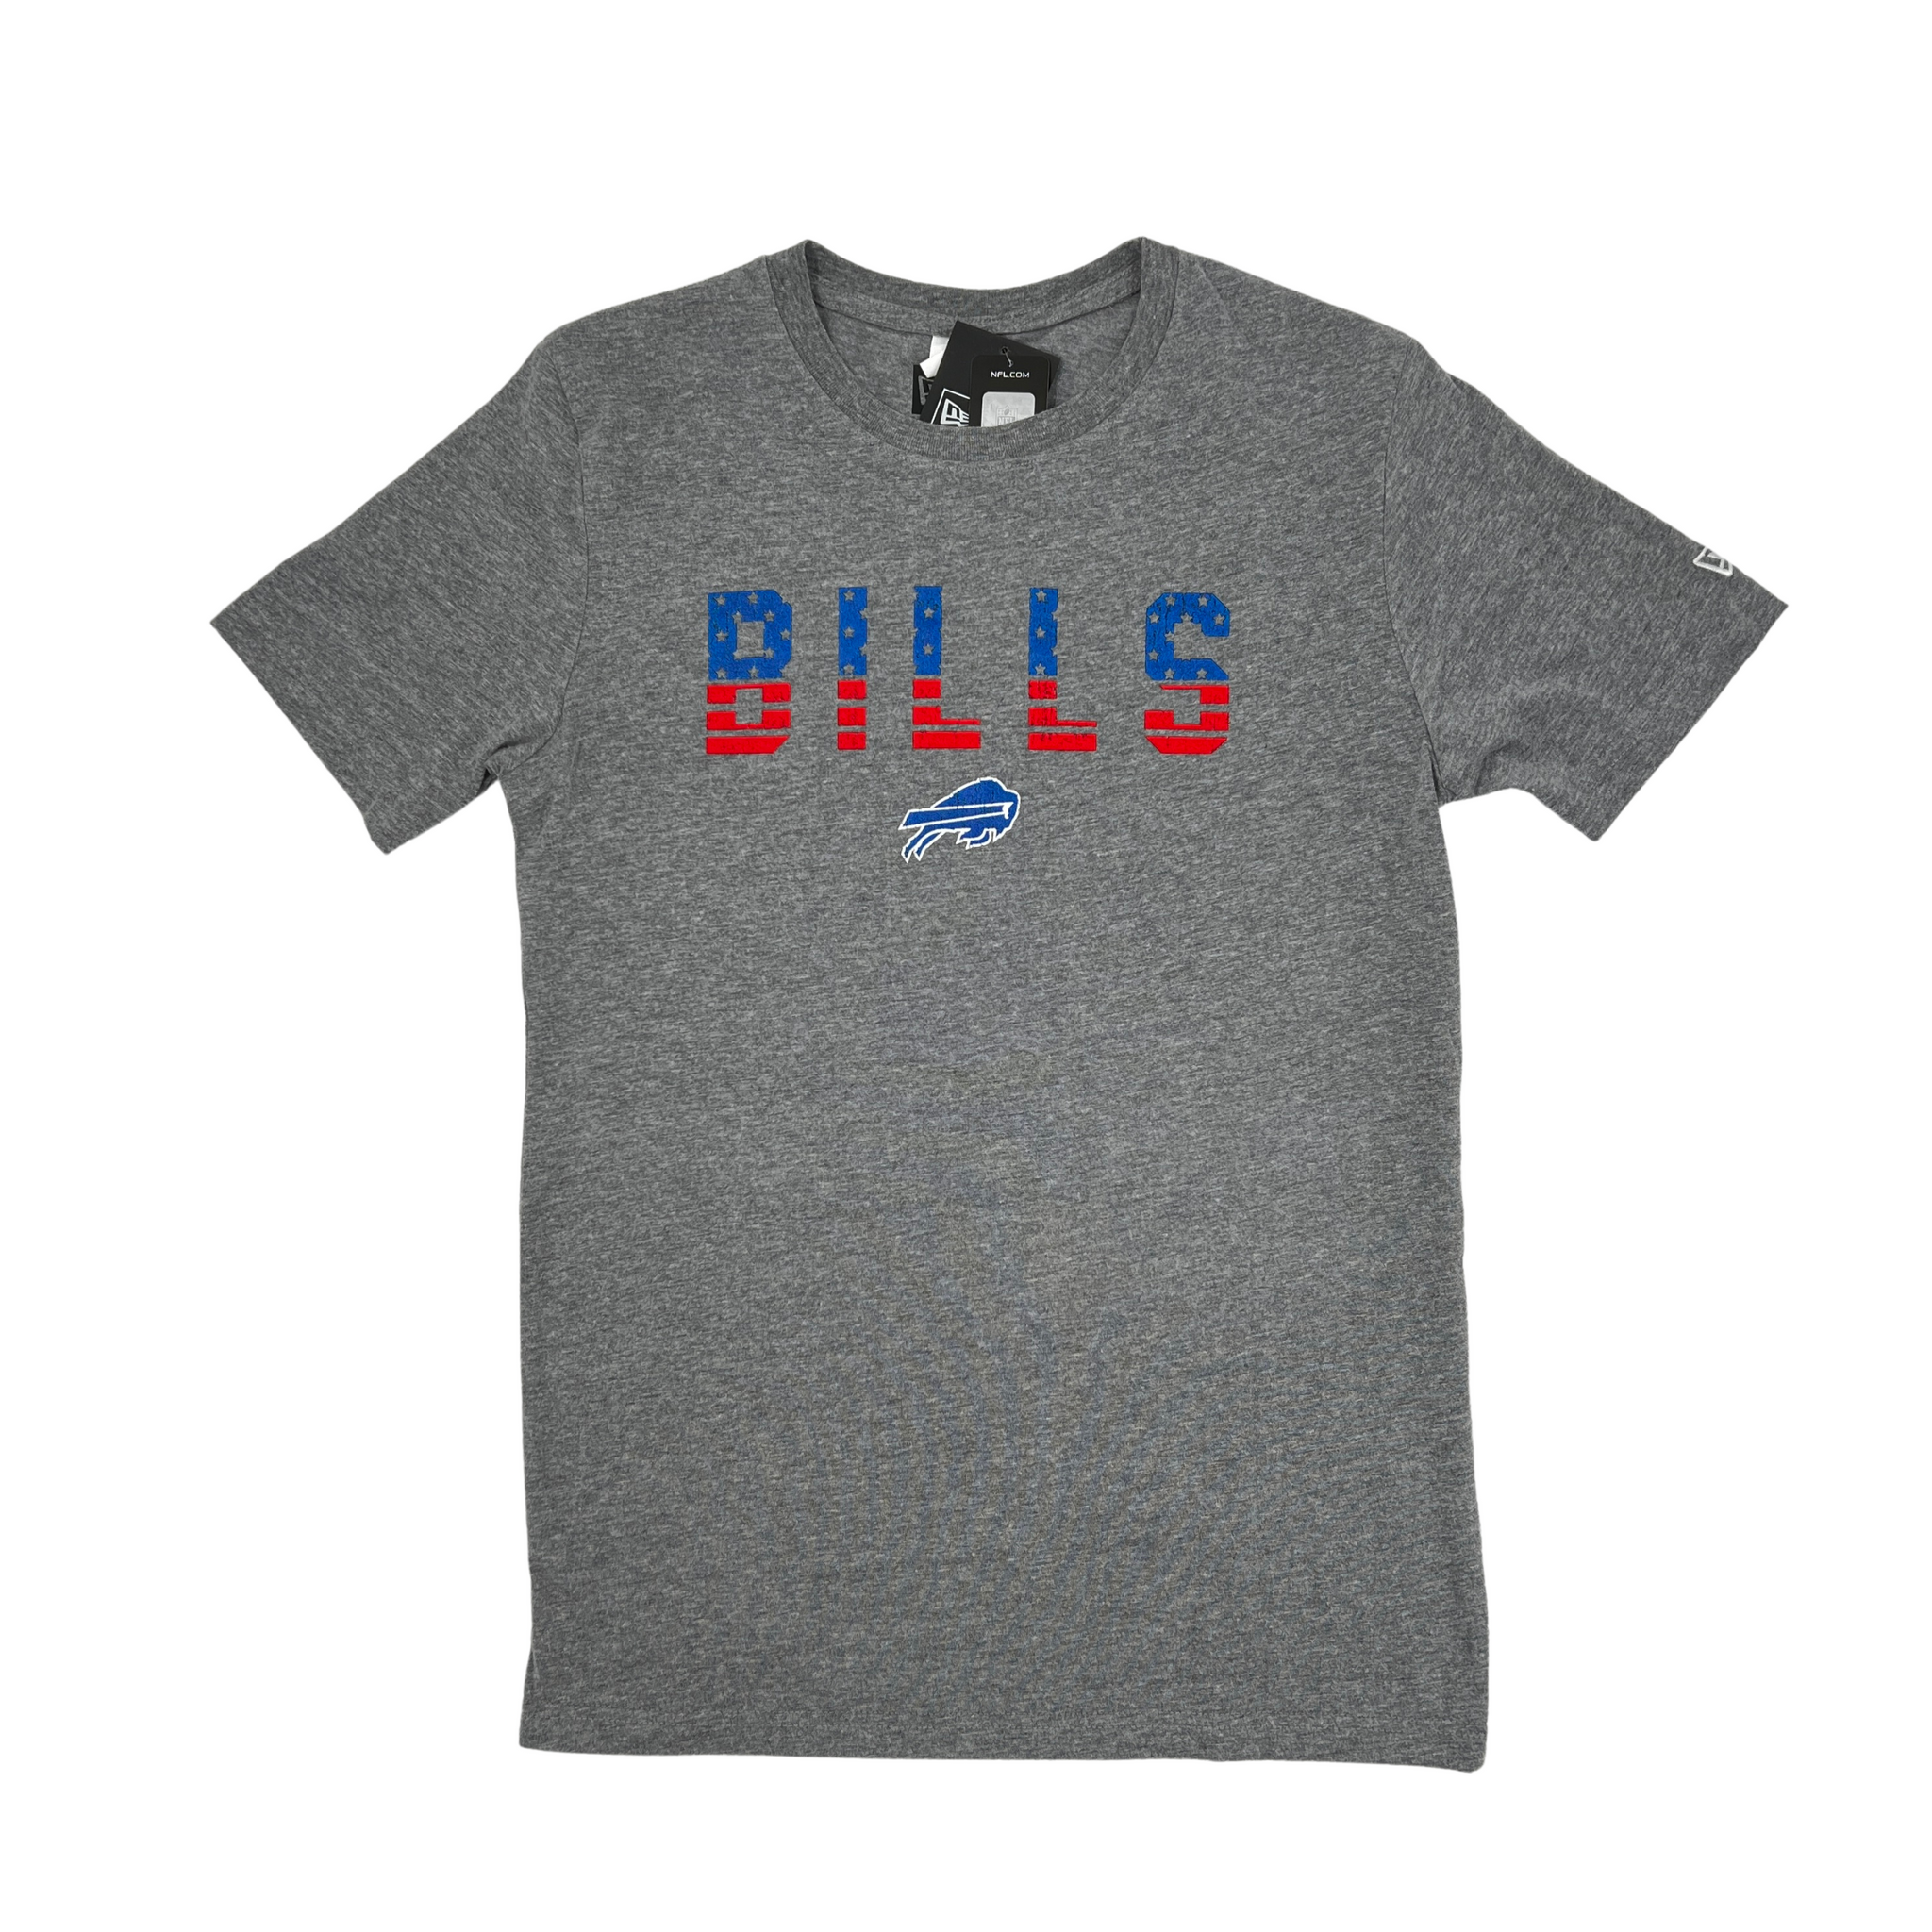 Shop New Buffalo Bills Apparel | The BFLO – Page – The BFLO Store